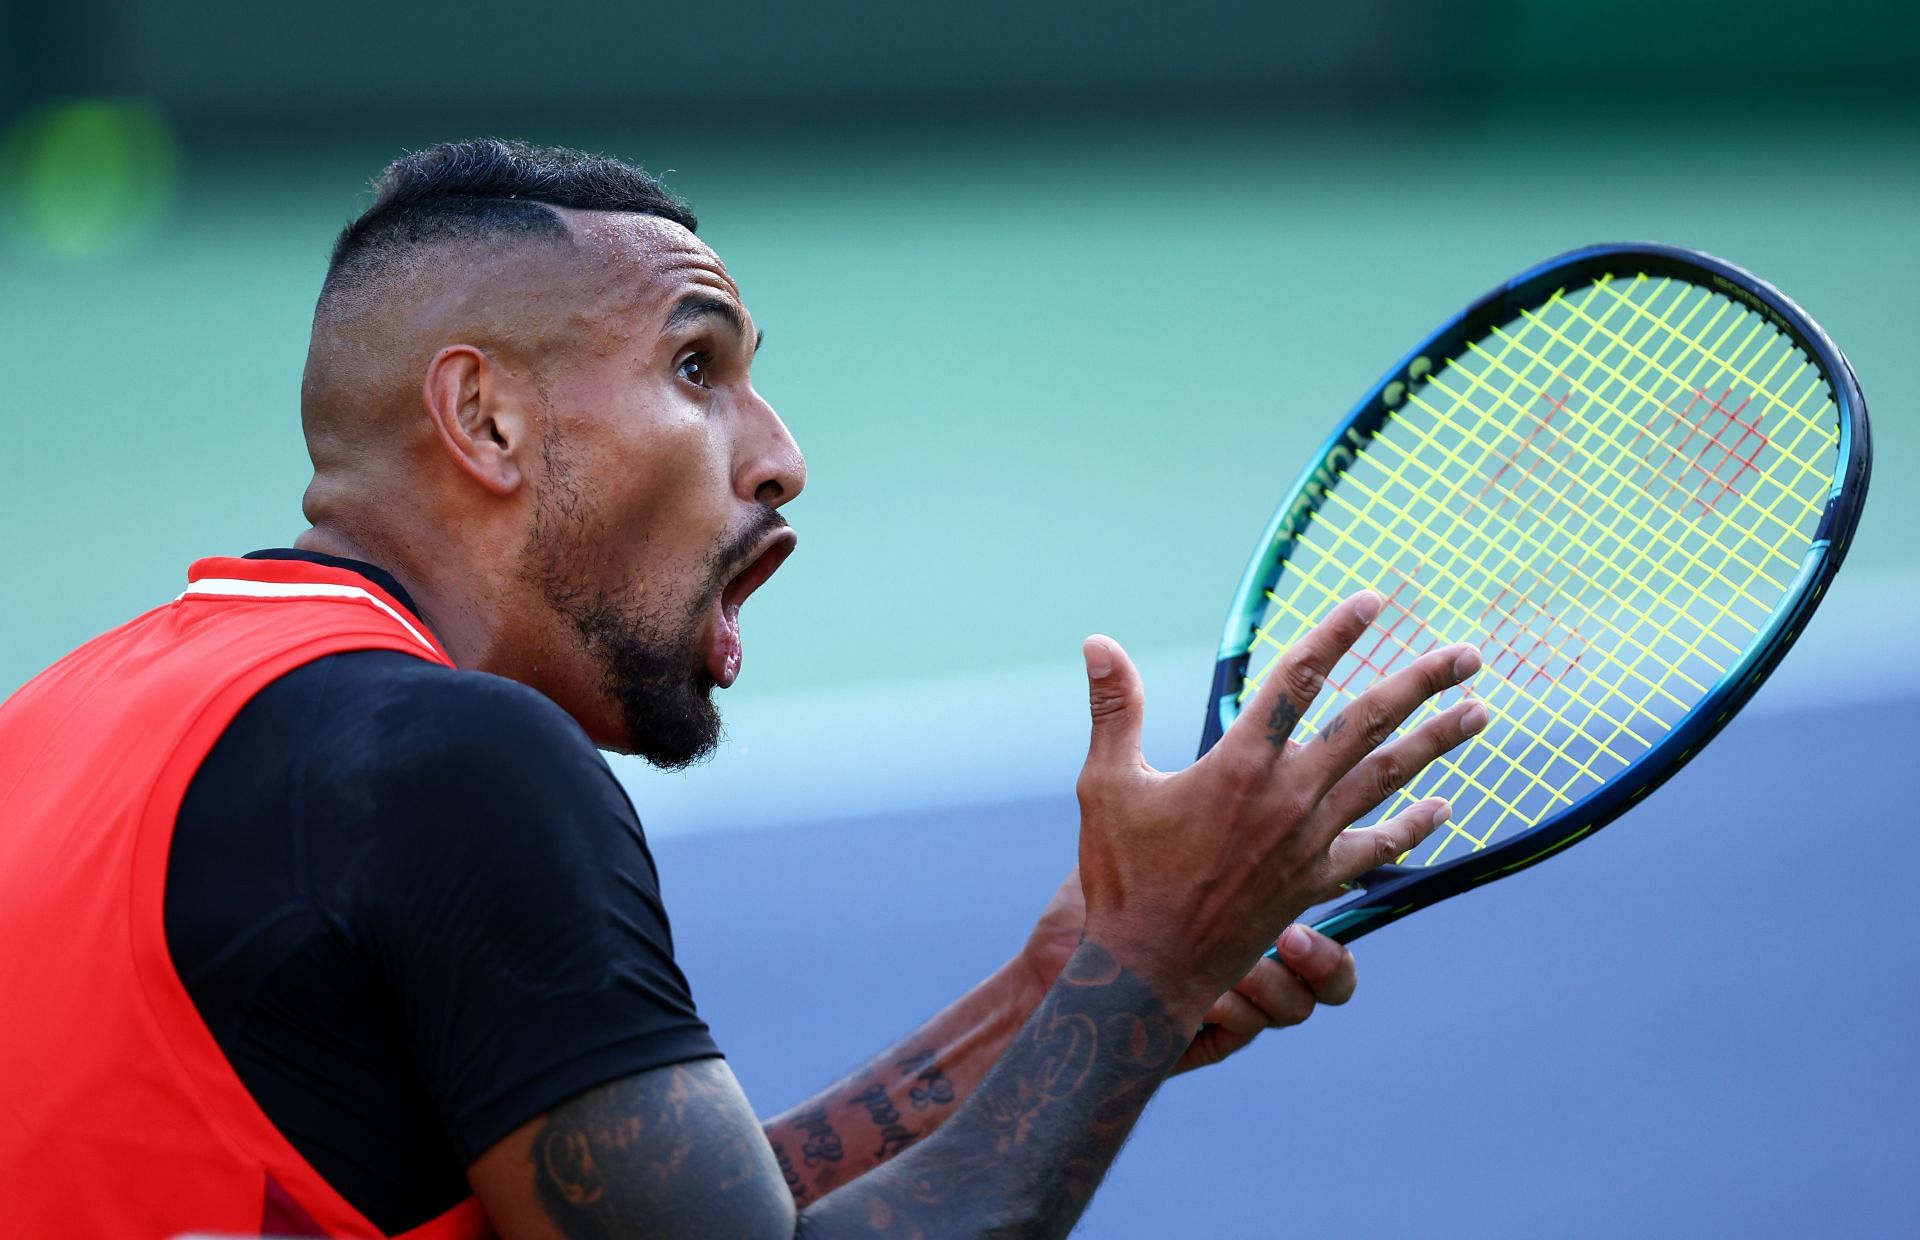 Nick Kyrgios has always had a frosty relationship with match officials.